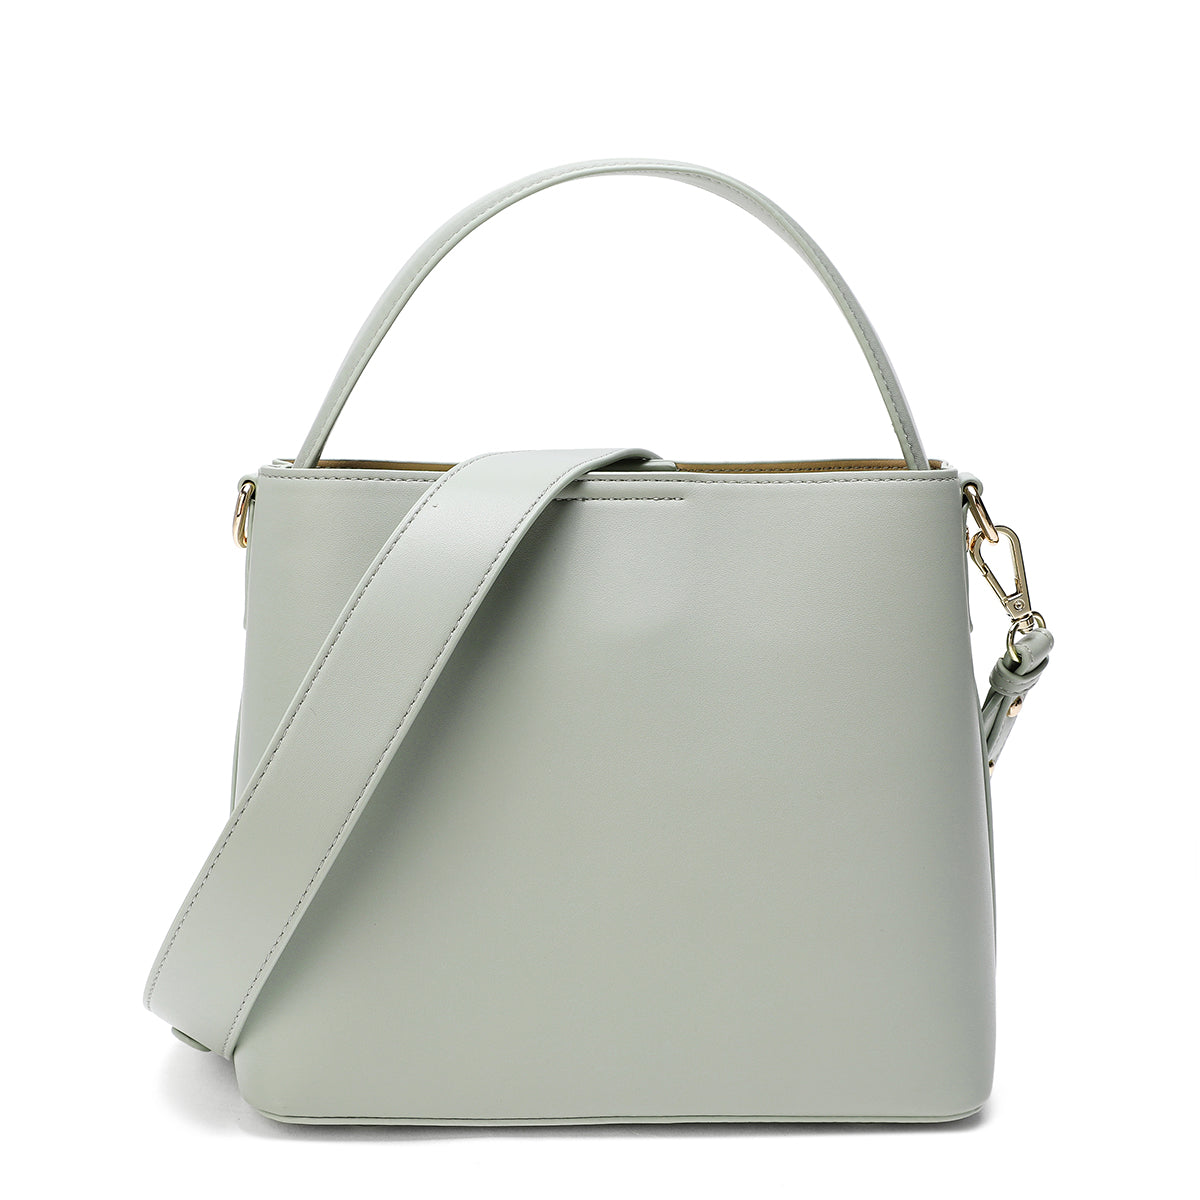 Elegant handbag with shoulder strap, width 23.5 cm, available in three colors